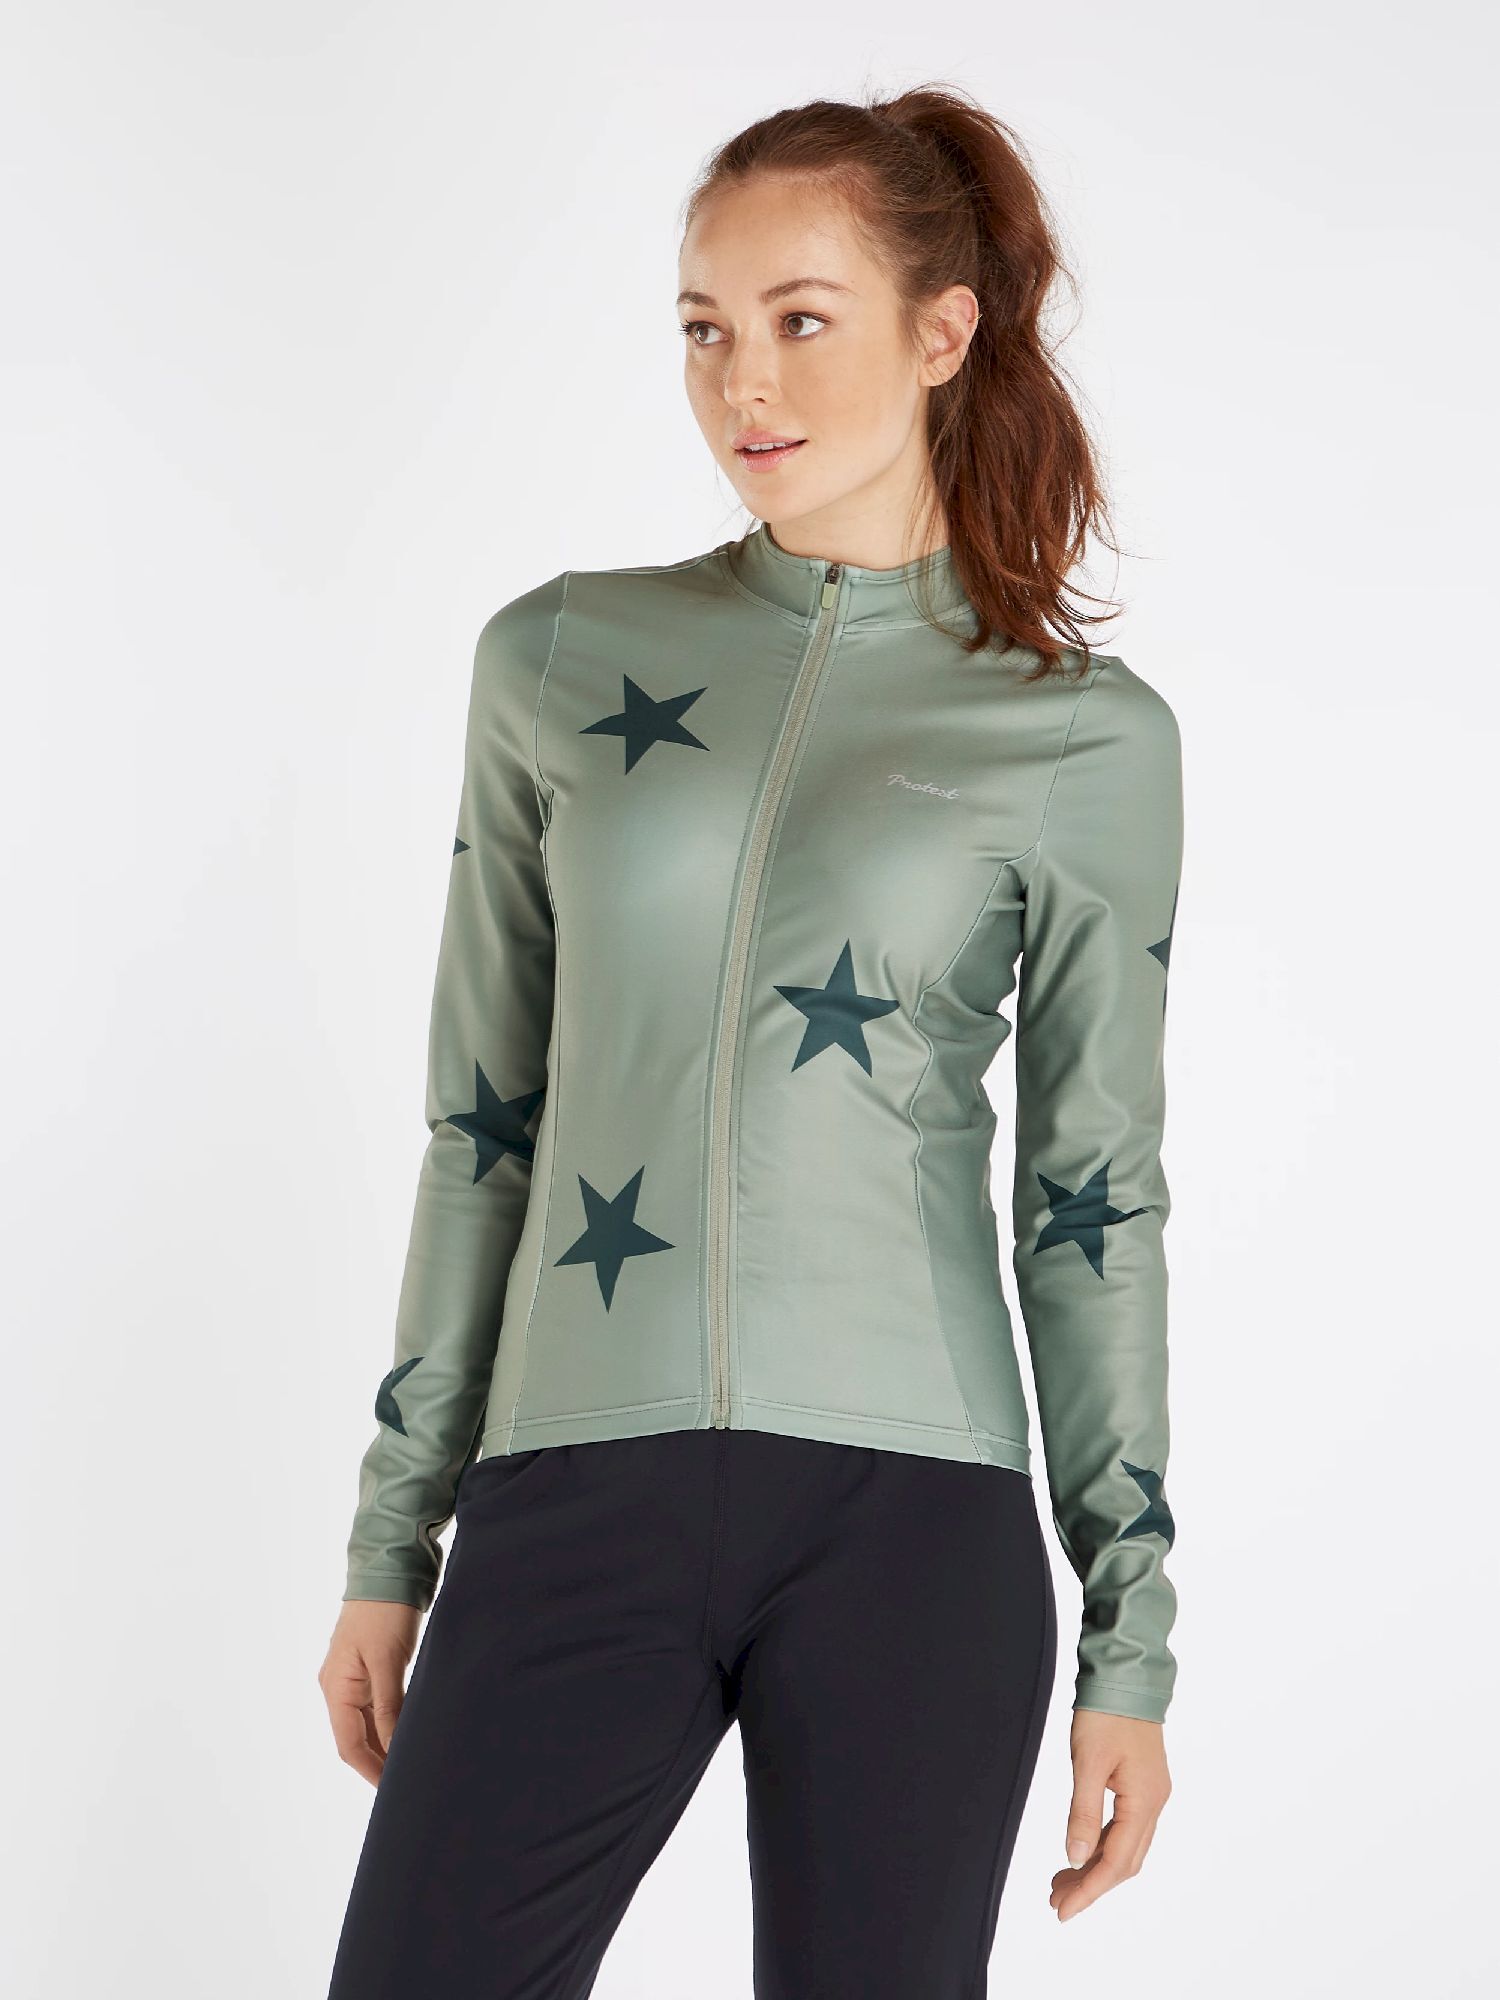 Protest Prtpecans - Cycling jersey - Women's | Hardloop